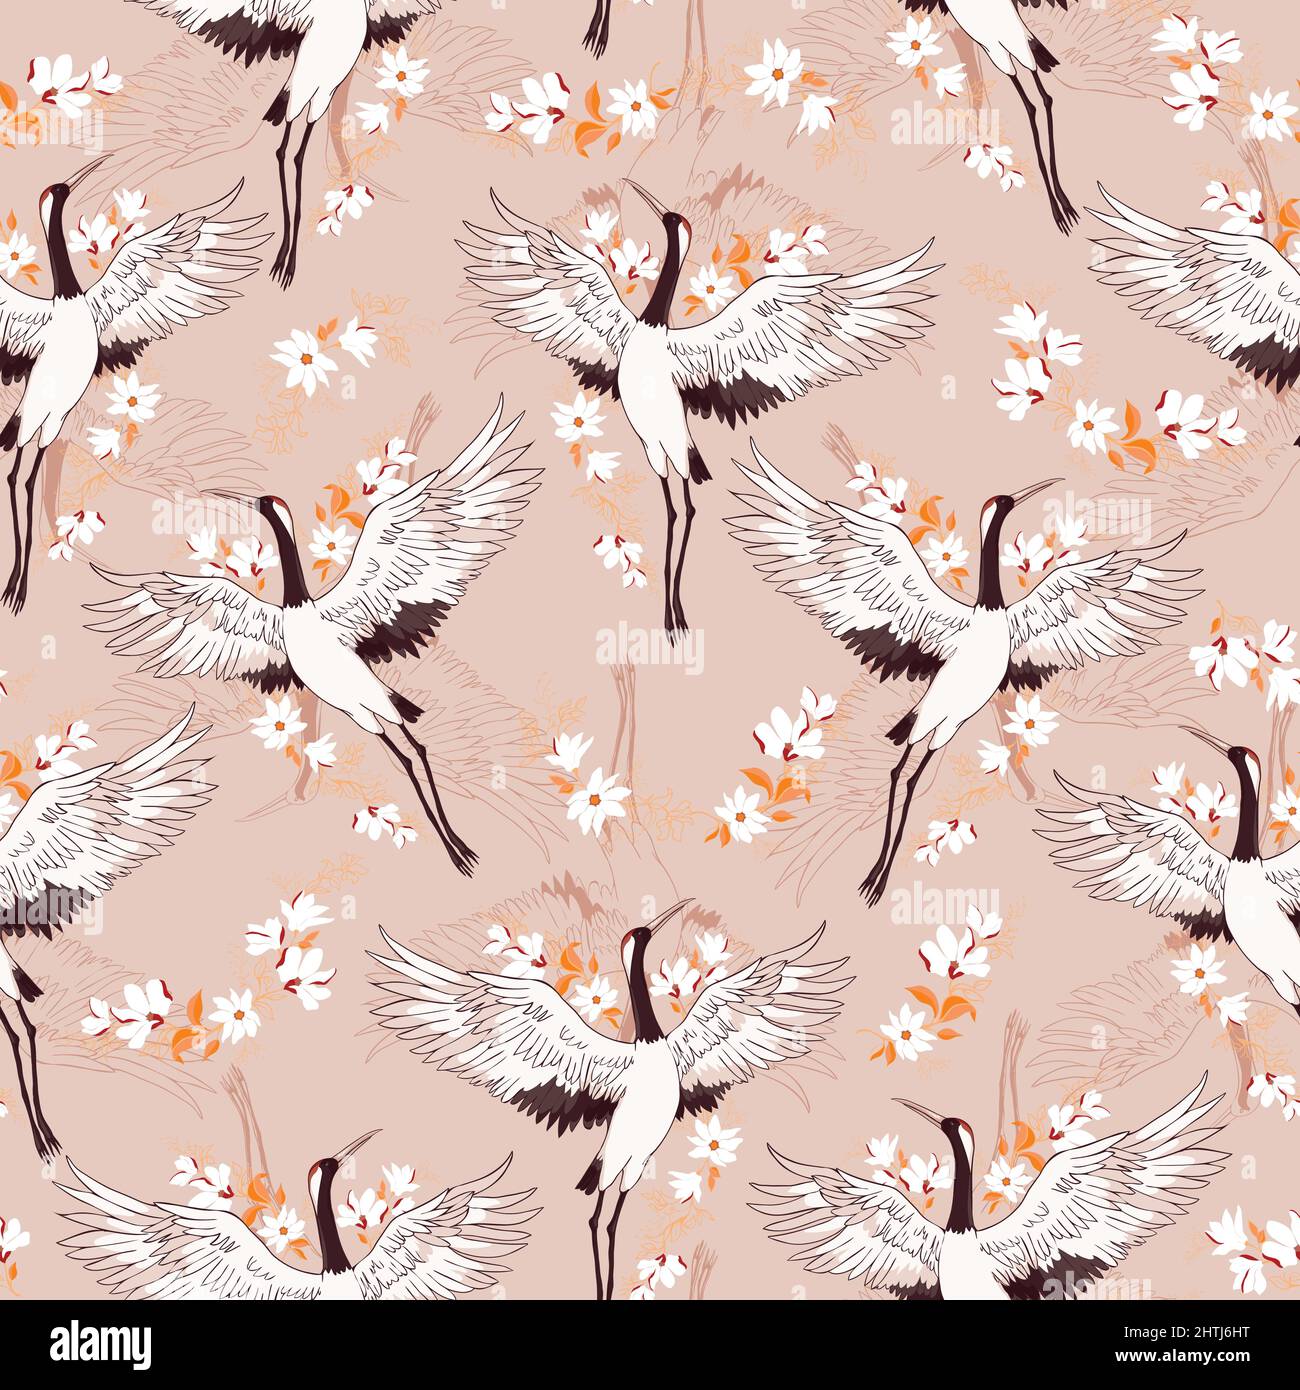 Decorative kimono floral motif background pattern with crane and flowers vector illustration Stock Vector